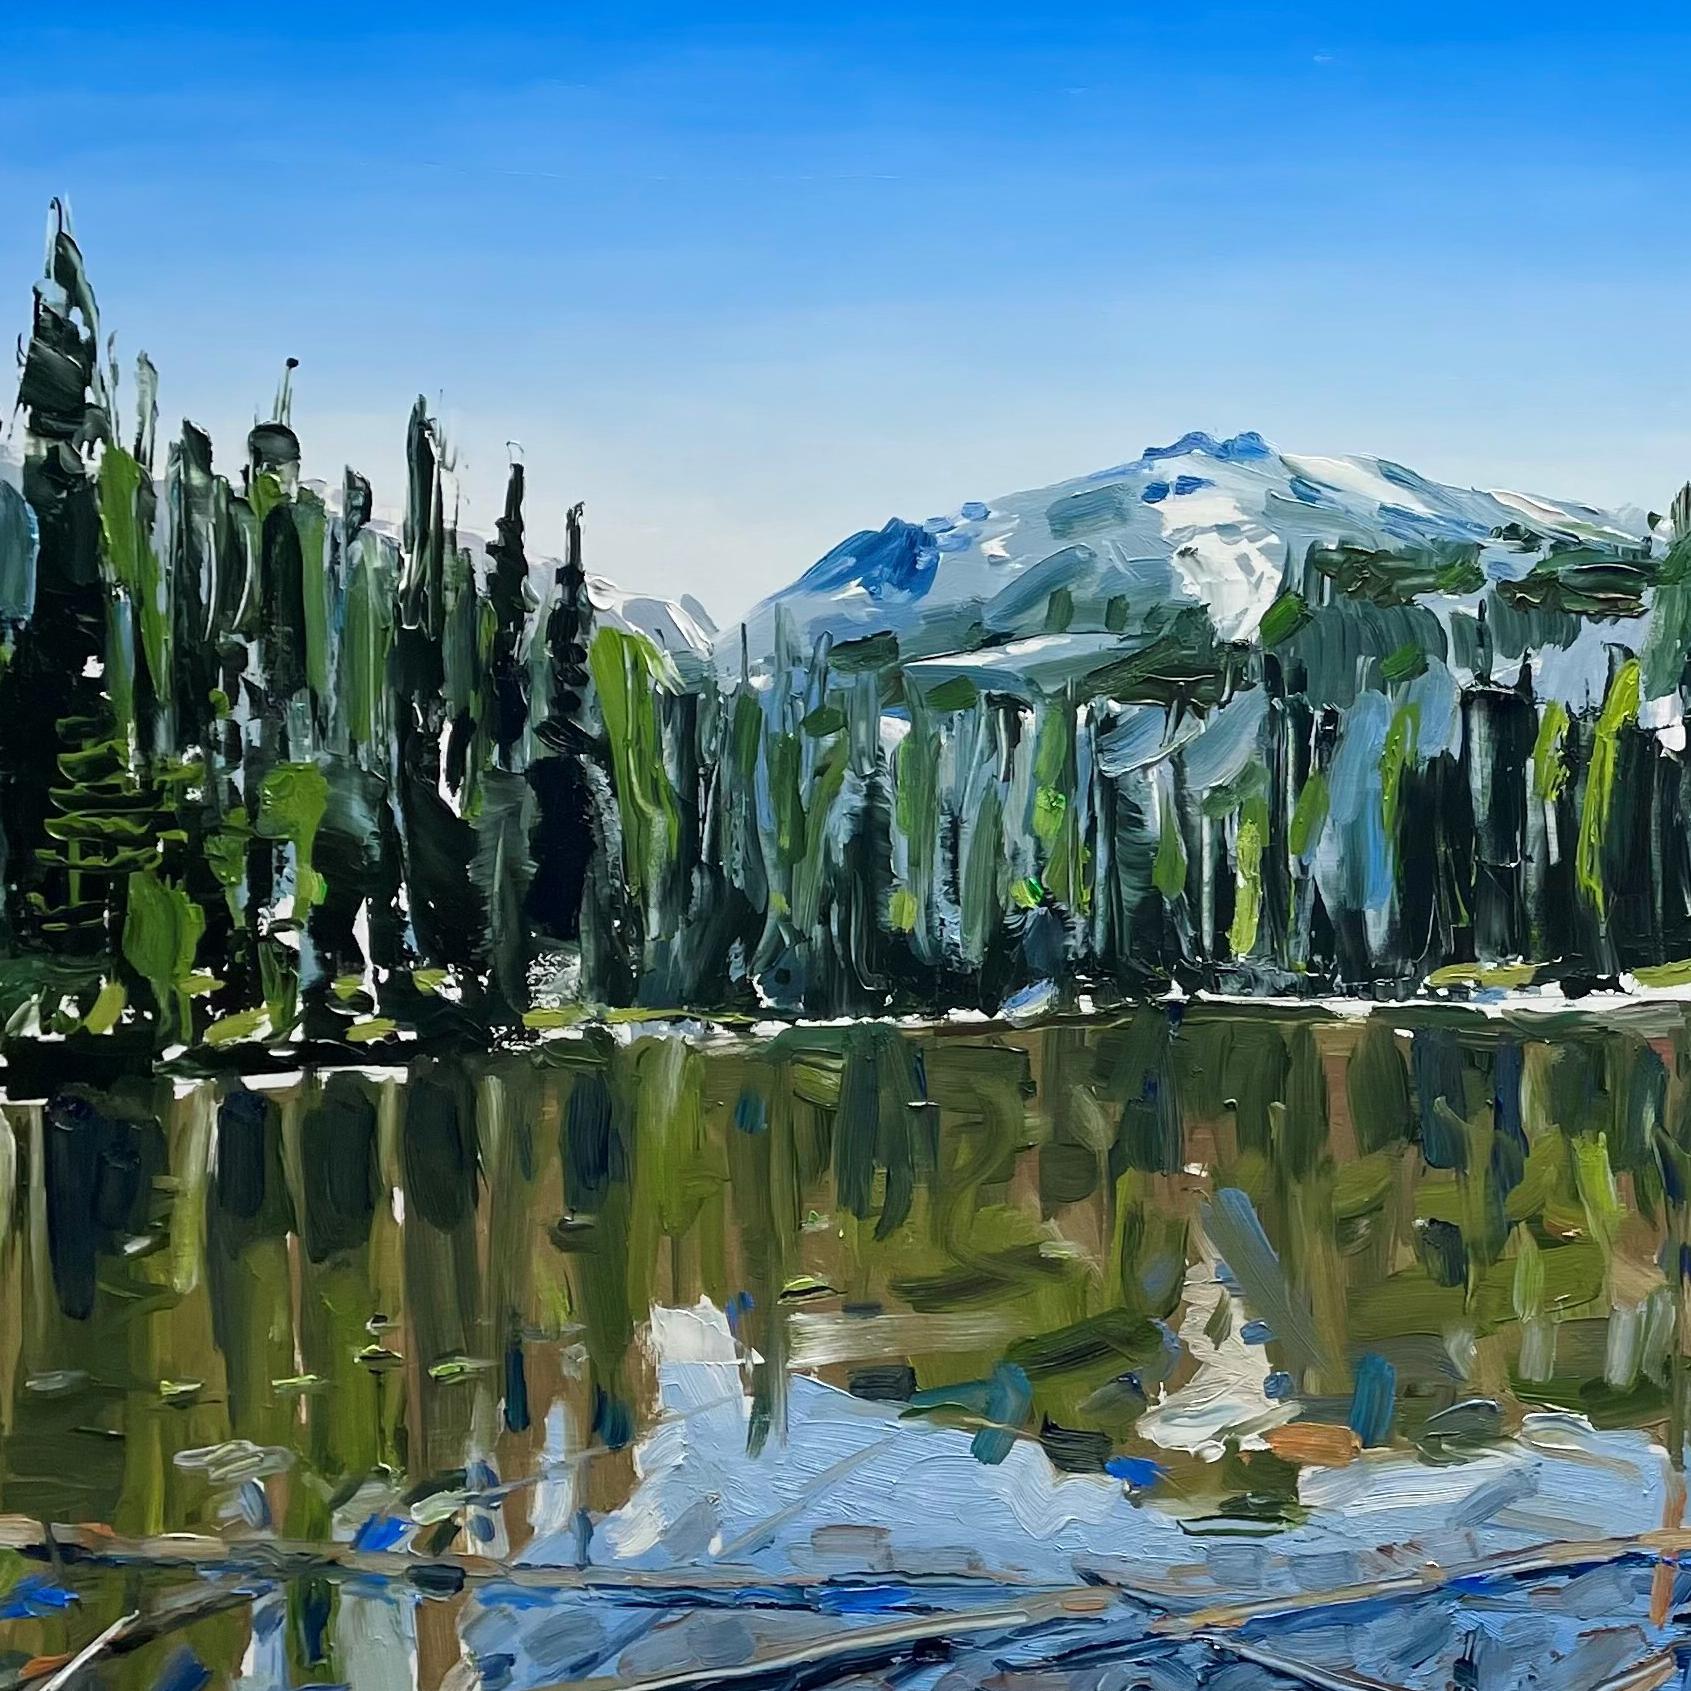 Nymph Lake, Rocky Mountain Park, CO, Original Oil Painting - Blue Landscape Painting by David Shingler